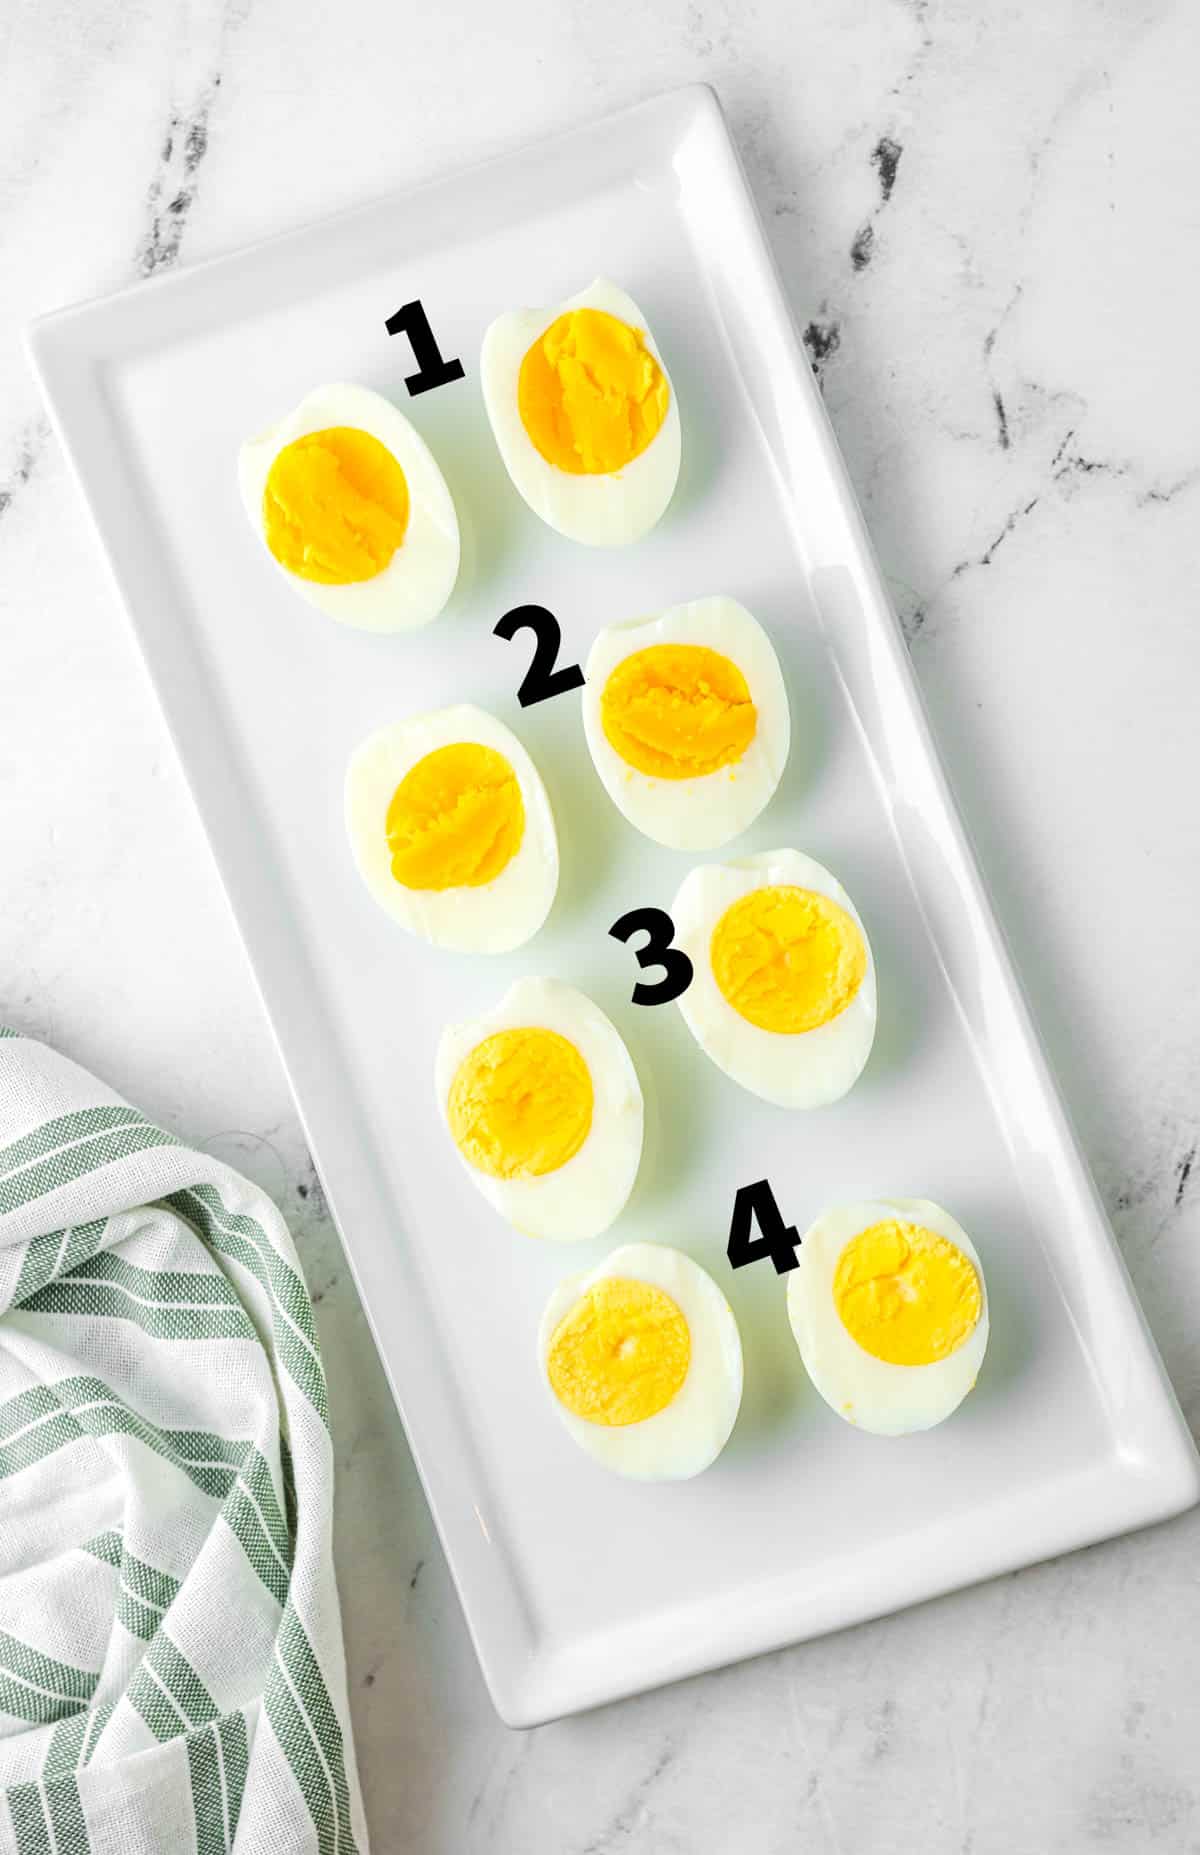 four hard boiled eggs sliced with different levels of doneness